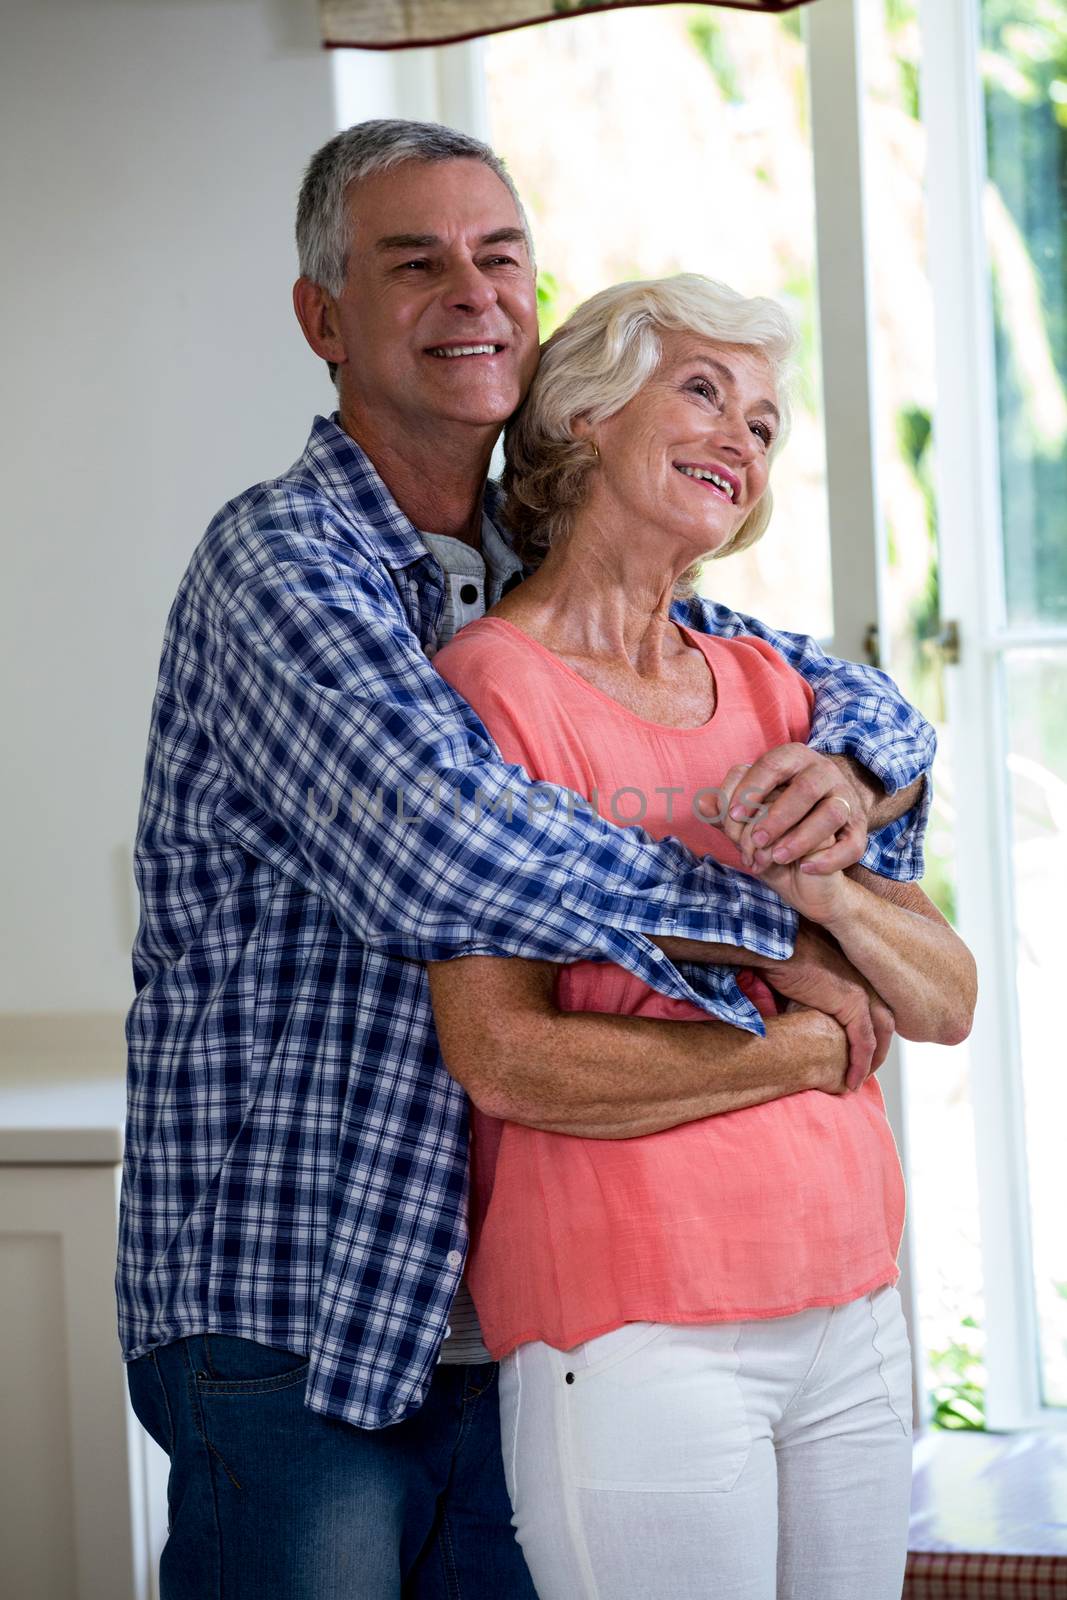 Romantic smiling couple embracing in kitchen at home